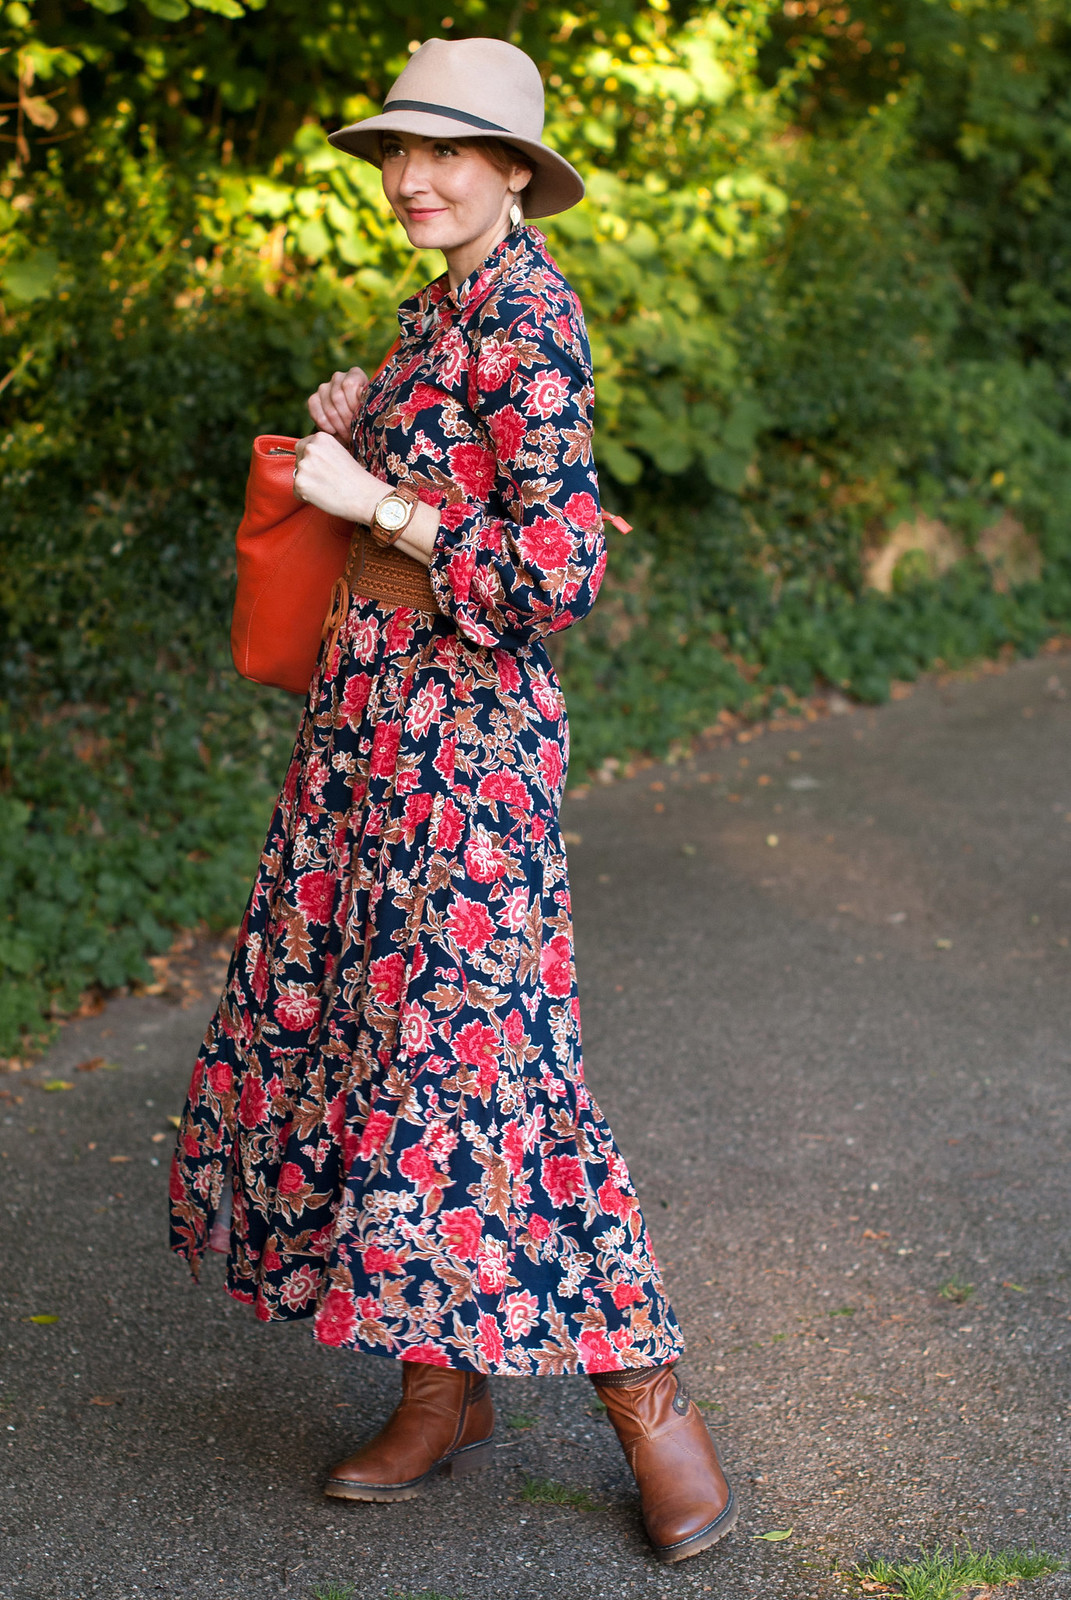 Romantic, Ralph Lauren-inspired 70s style autumn/fall outfit: Floral maxi dress tan belt and boots camel fedora orange leather tote bag | Not Dressed As Lamb, over 40 style